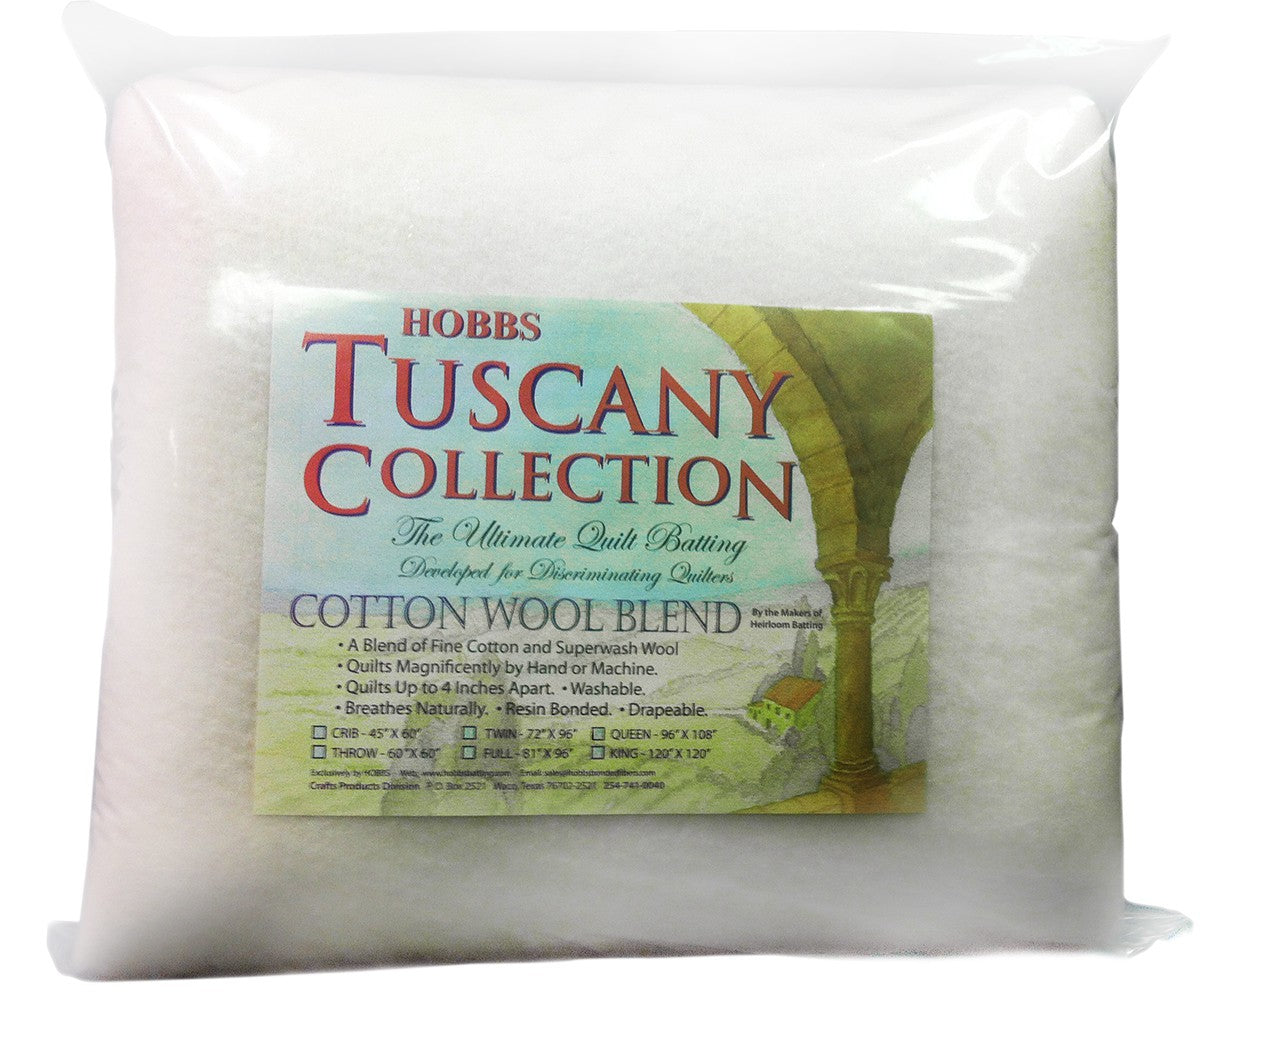 Hobbs Tuscany Unbleached 100% Natural Cotton Quilt Batting